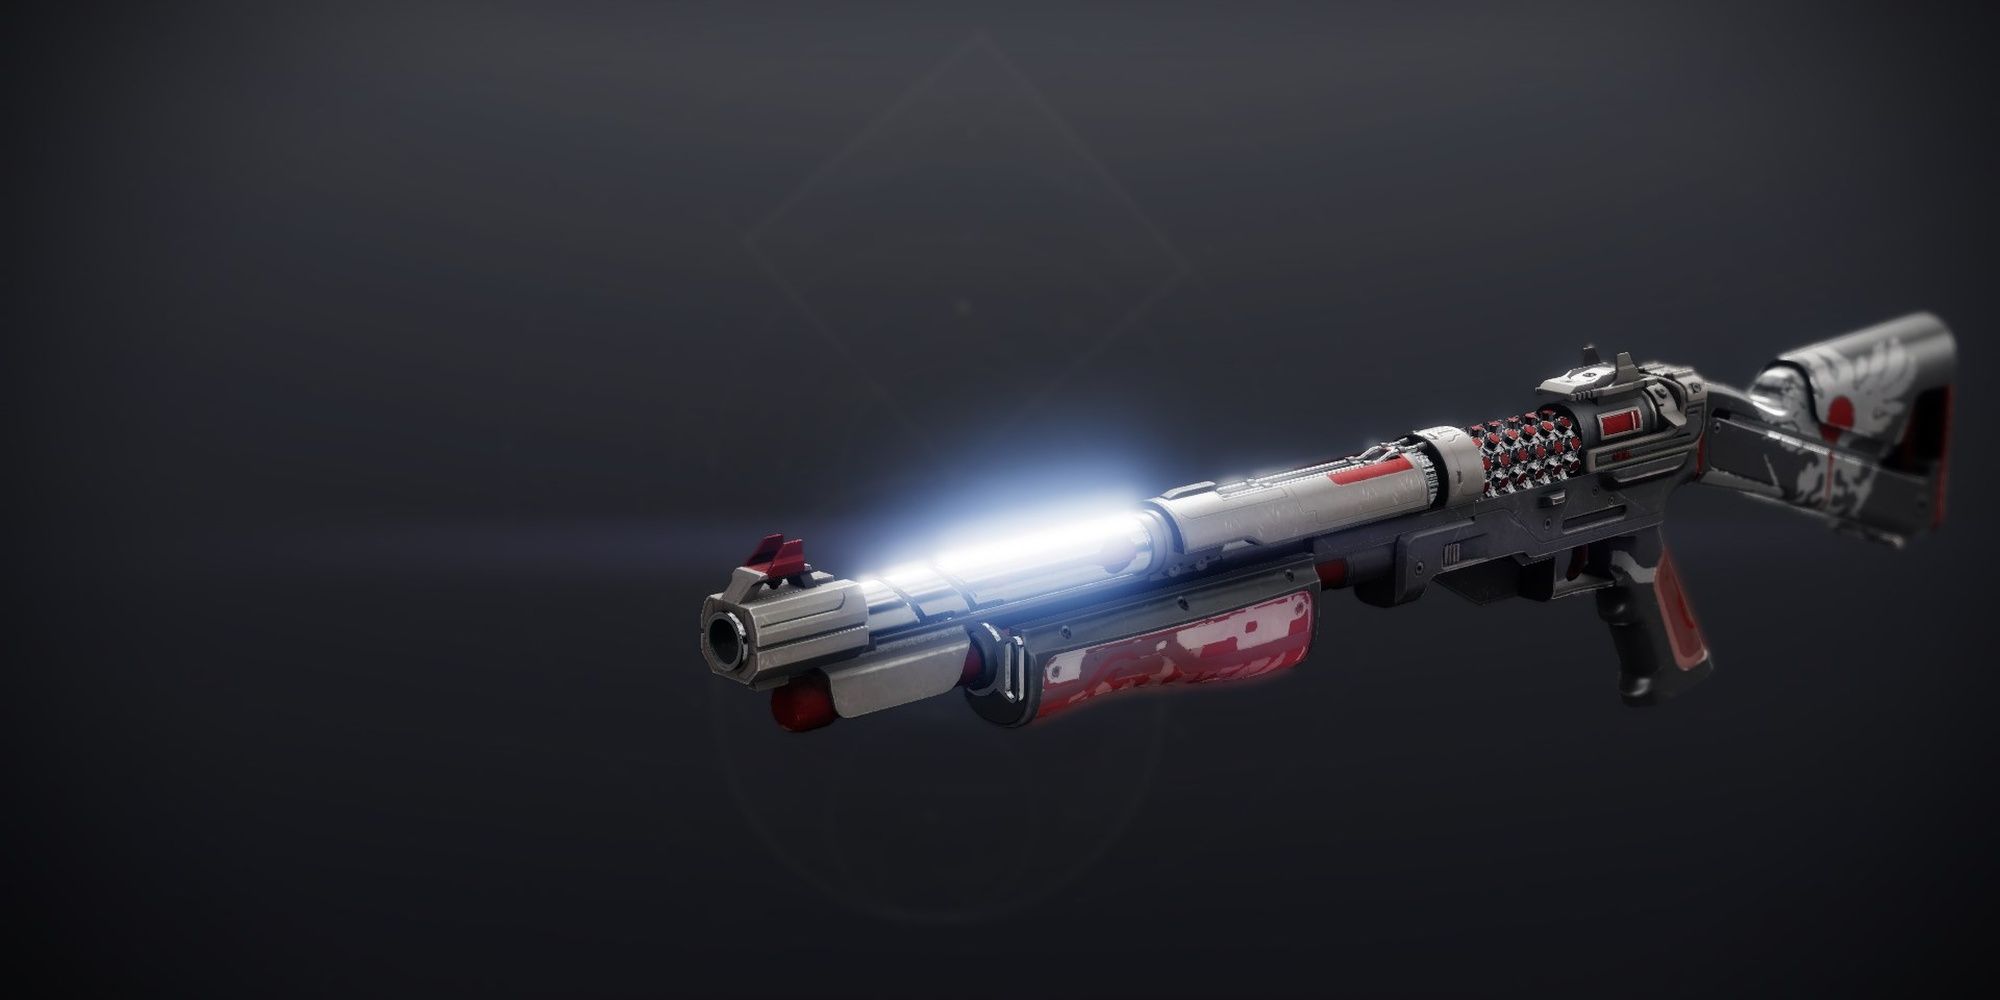 Destiny 2 Reckless Endangerment Done and Dusty Ornament